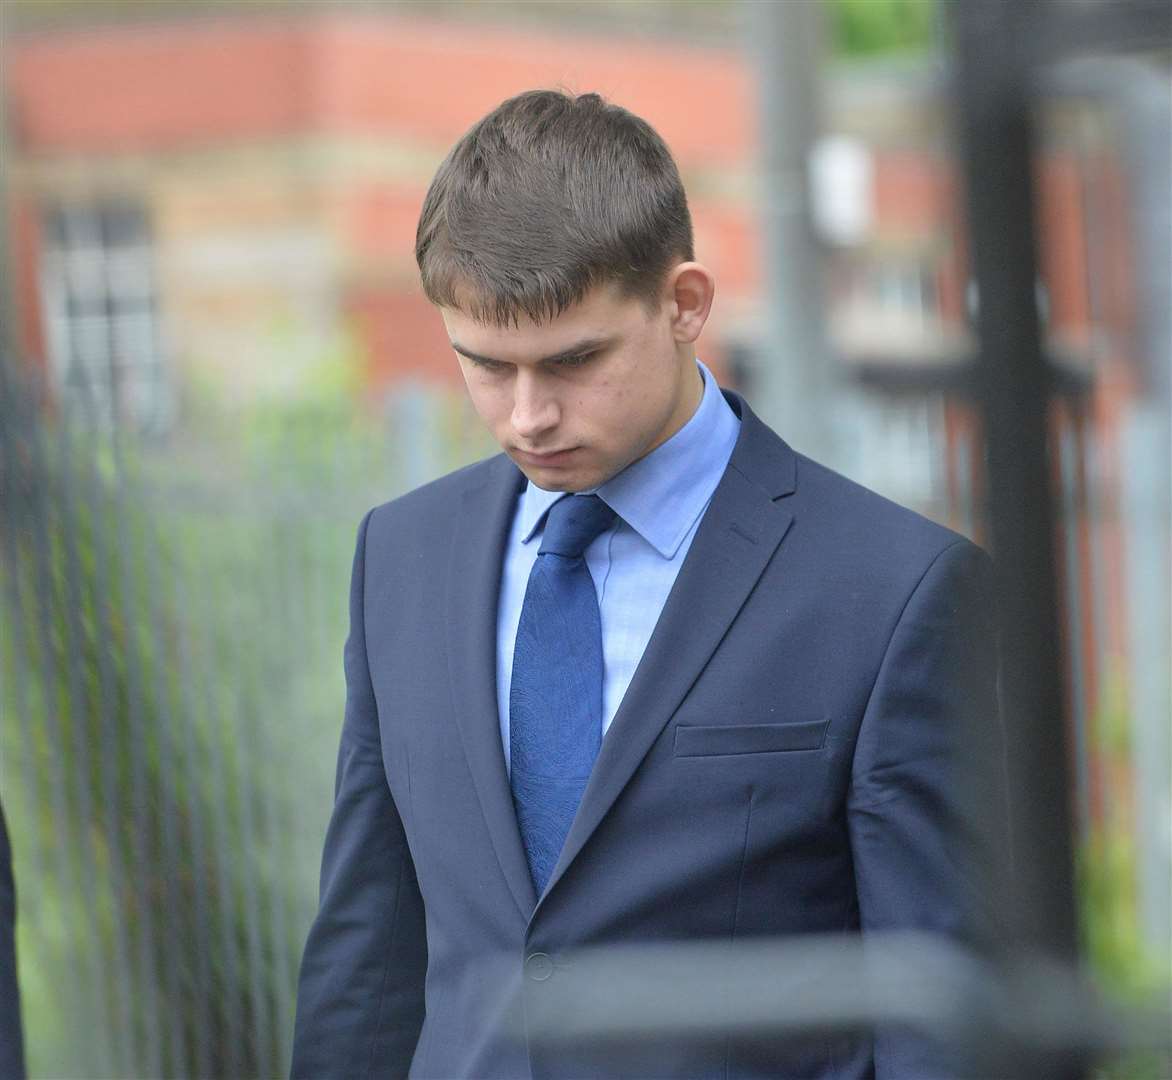 Inverness Athlete Jailed After Being Convicted Of Raping A Young Woman 